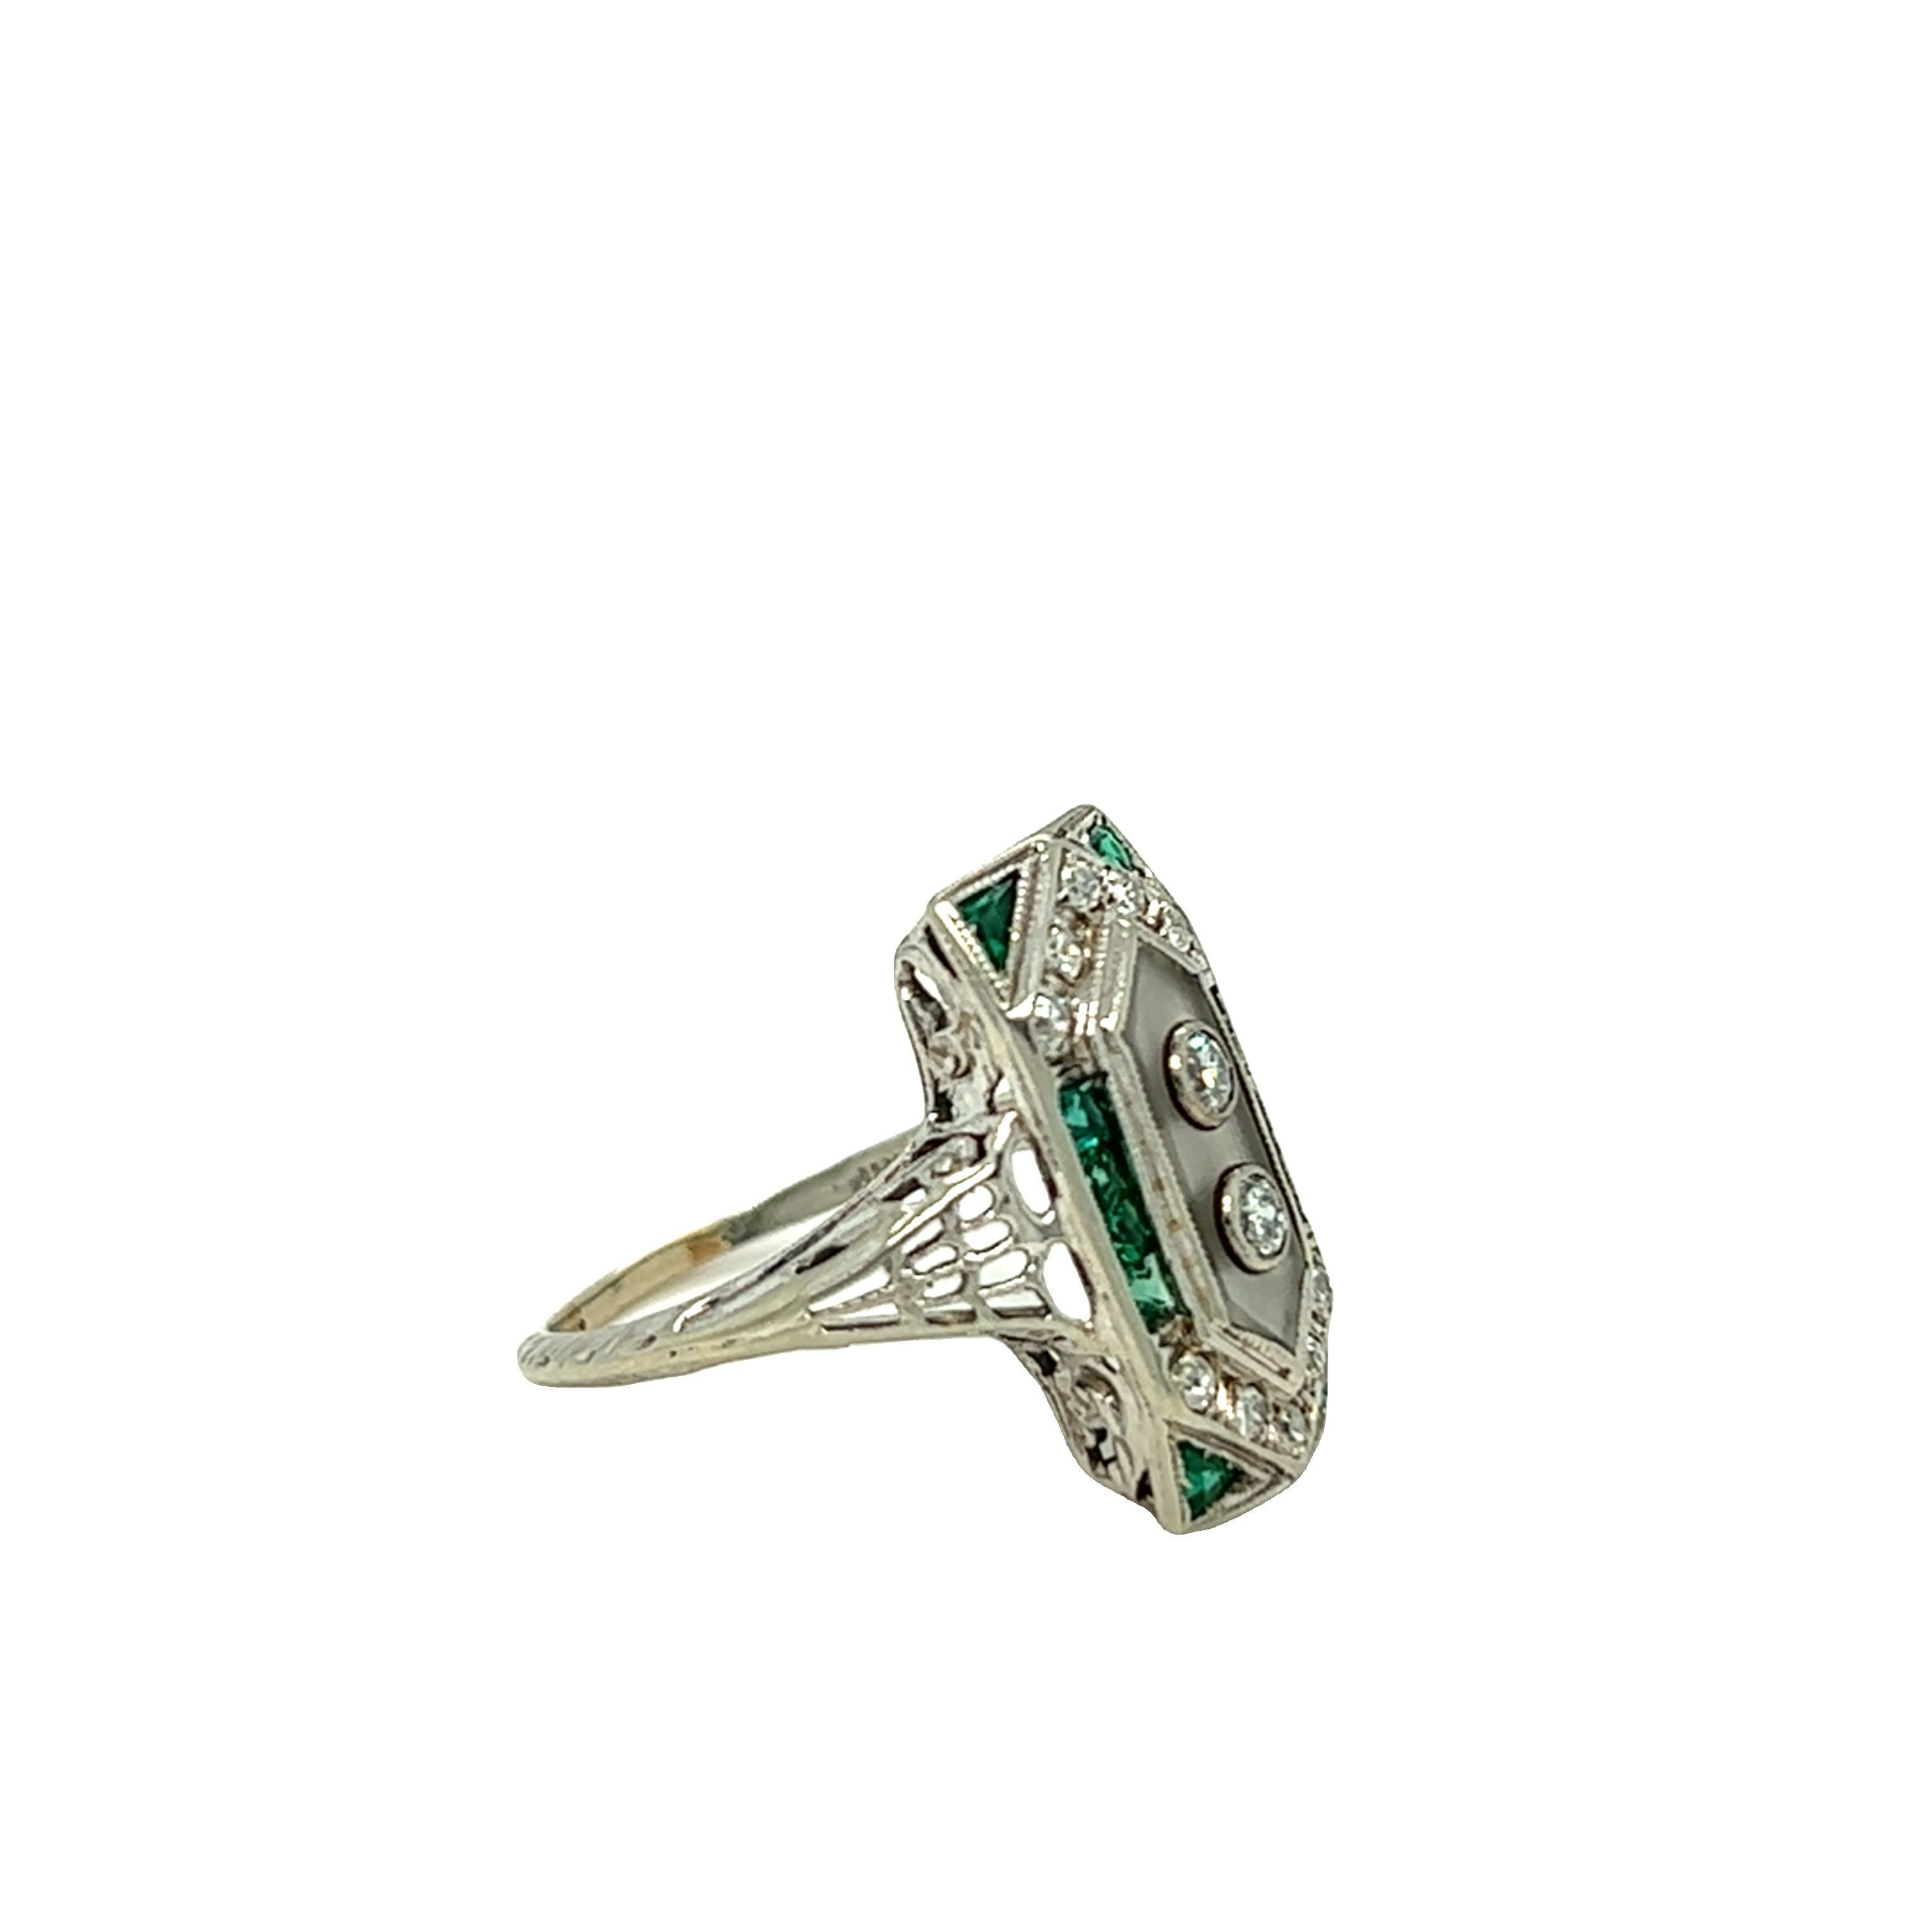 Edwardian Diamond, Emerald, Quartz Plaque Ring 18K White Gold In Excellent Condition For Sale In beverly hills, CA